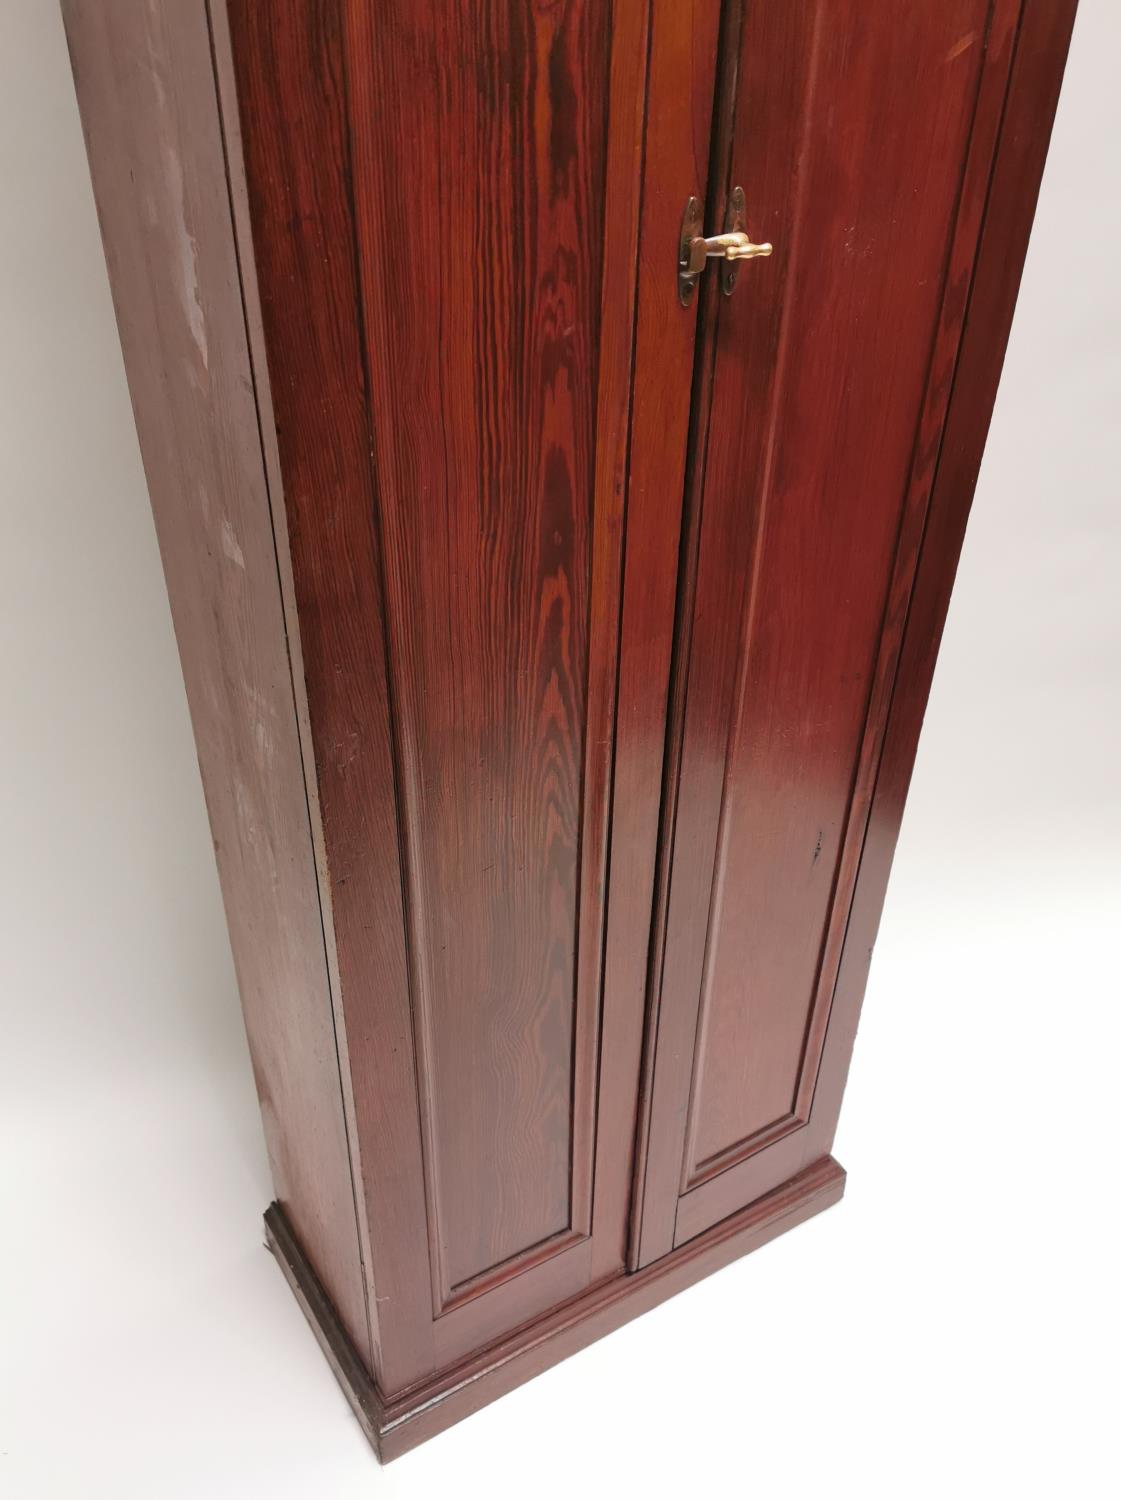 Edwardian pitch pine hall cupboard. - Image 3 of 4